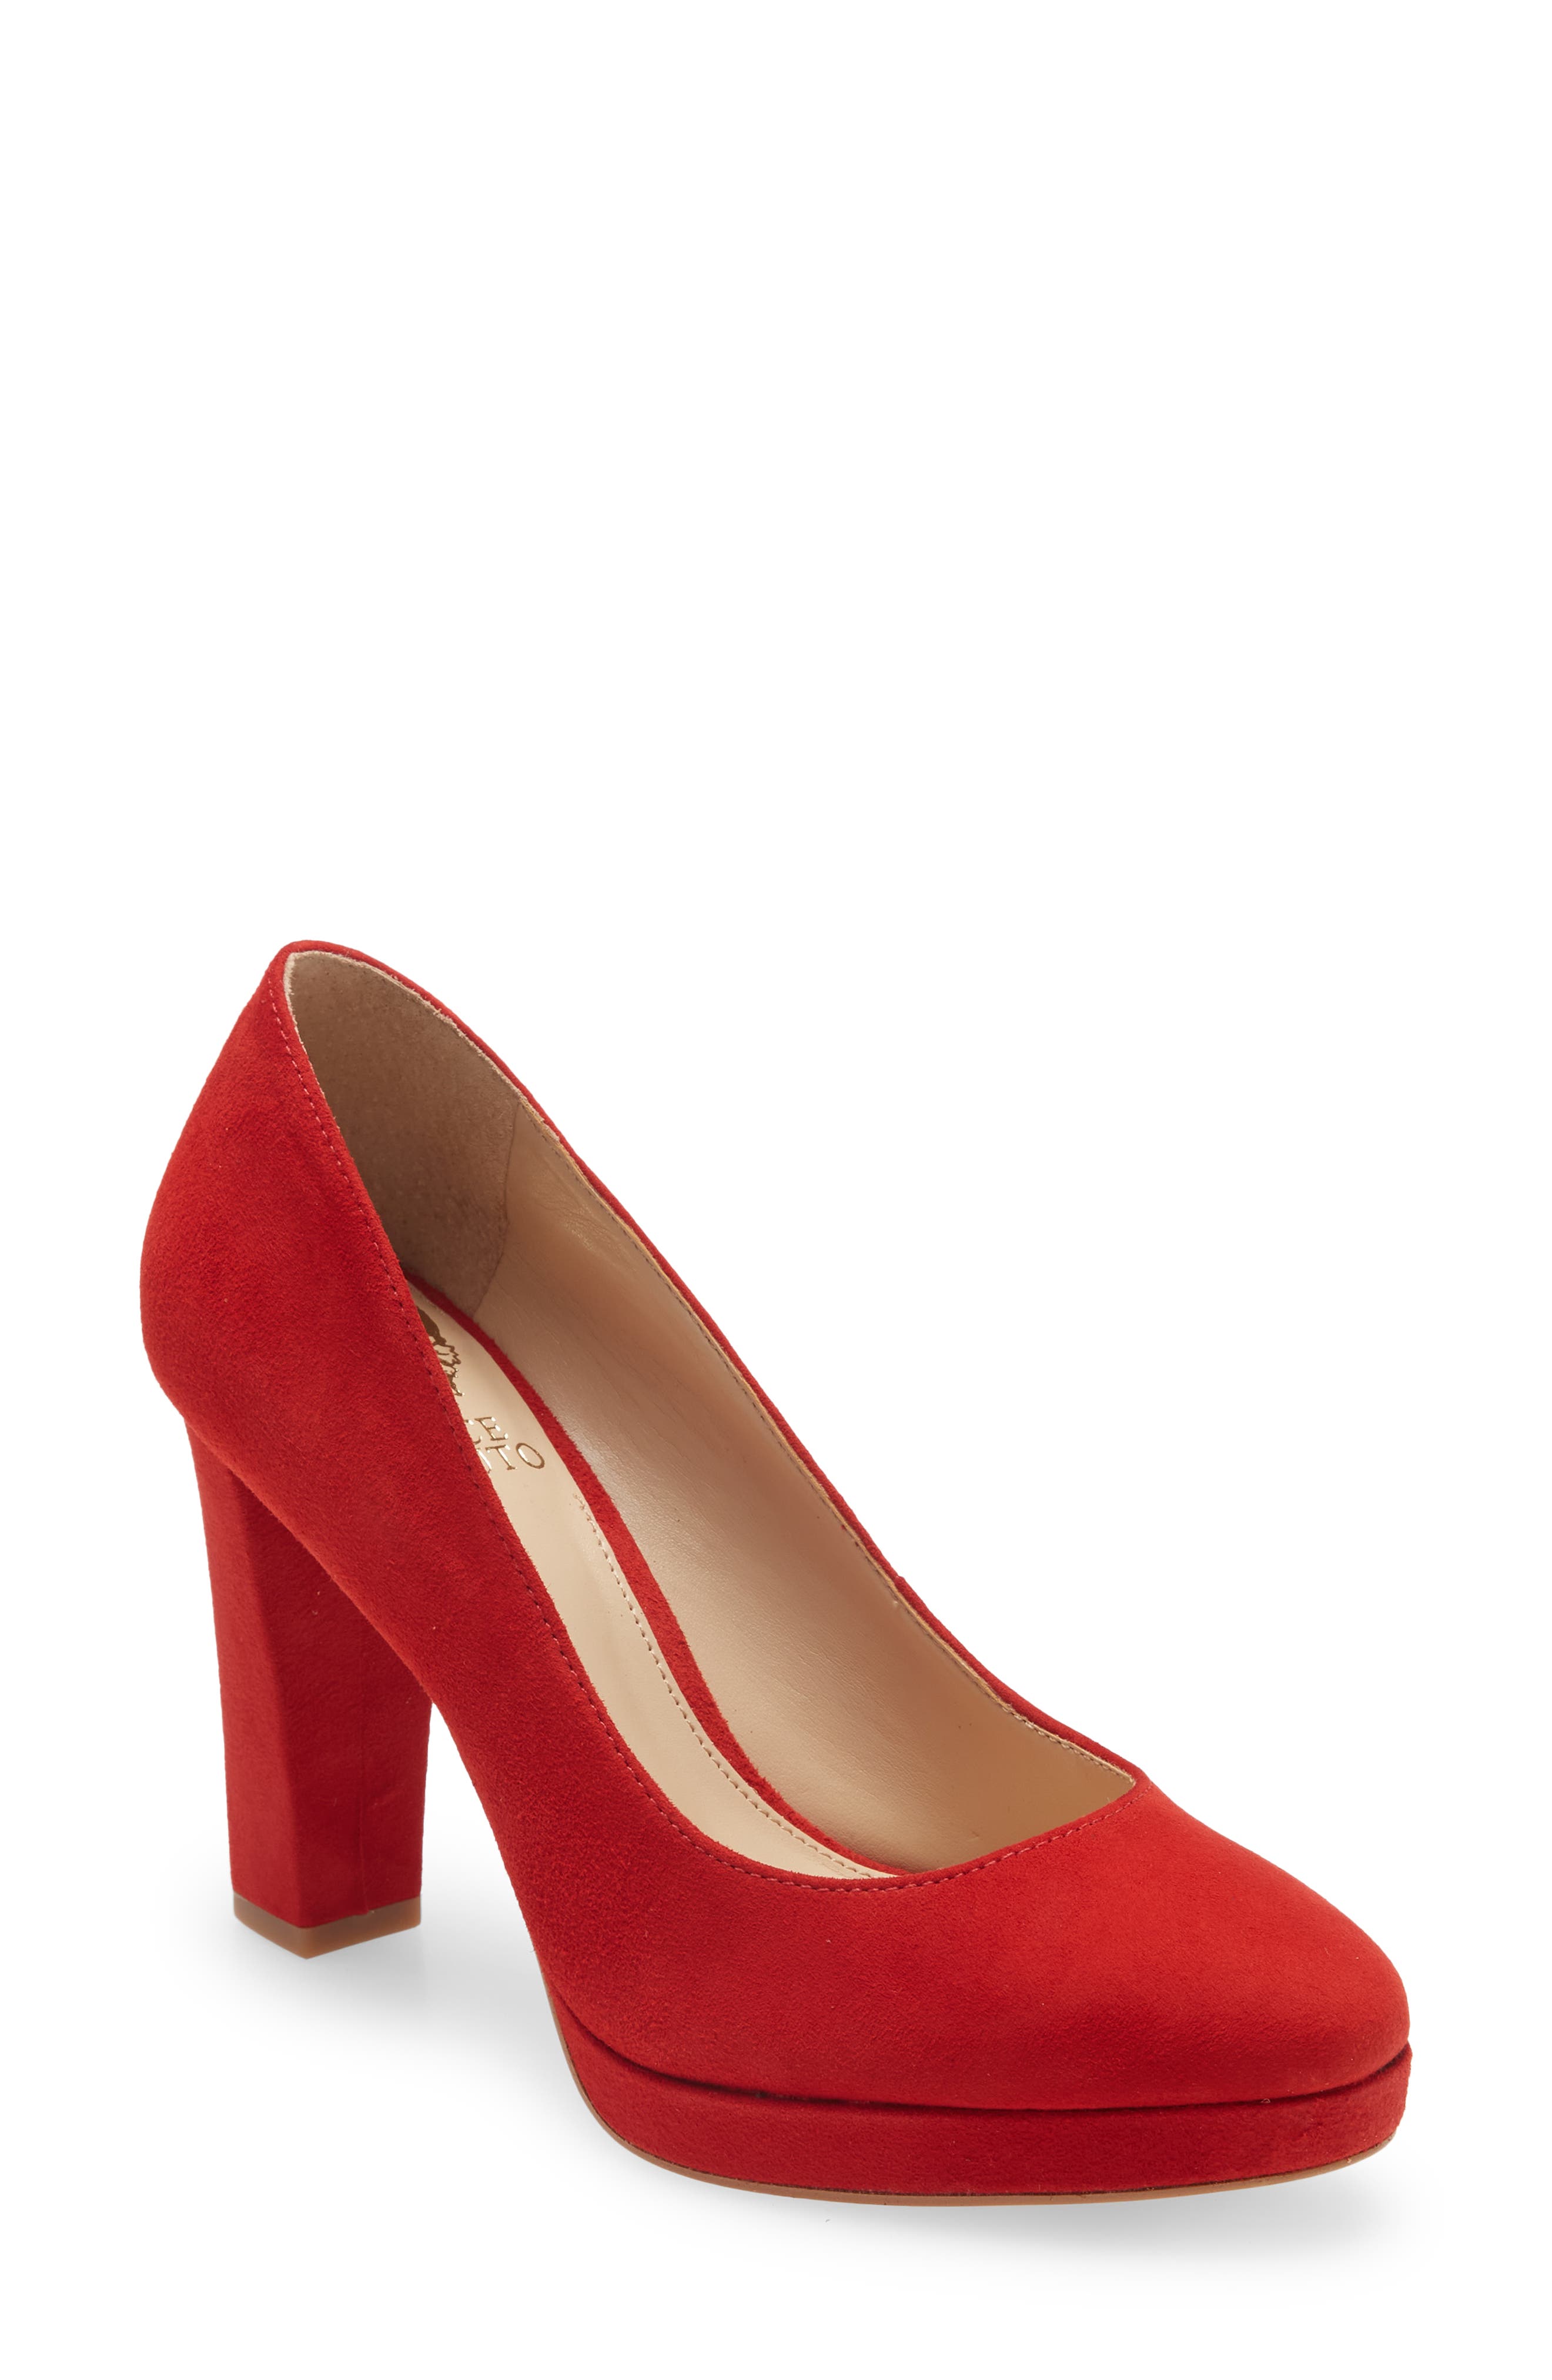 UPC 191707345843 product image for Vince Camuto Halria Pump in Cherry Berry True Suede at Nordstrom, Size 10 | upcitemdb.com